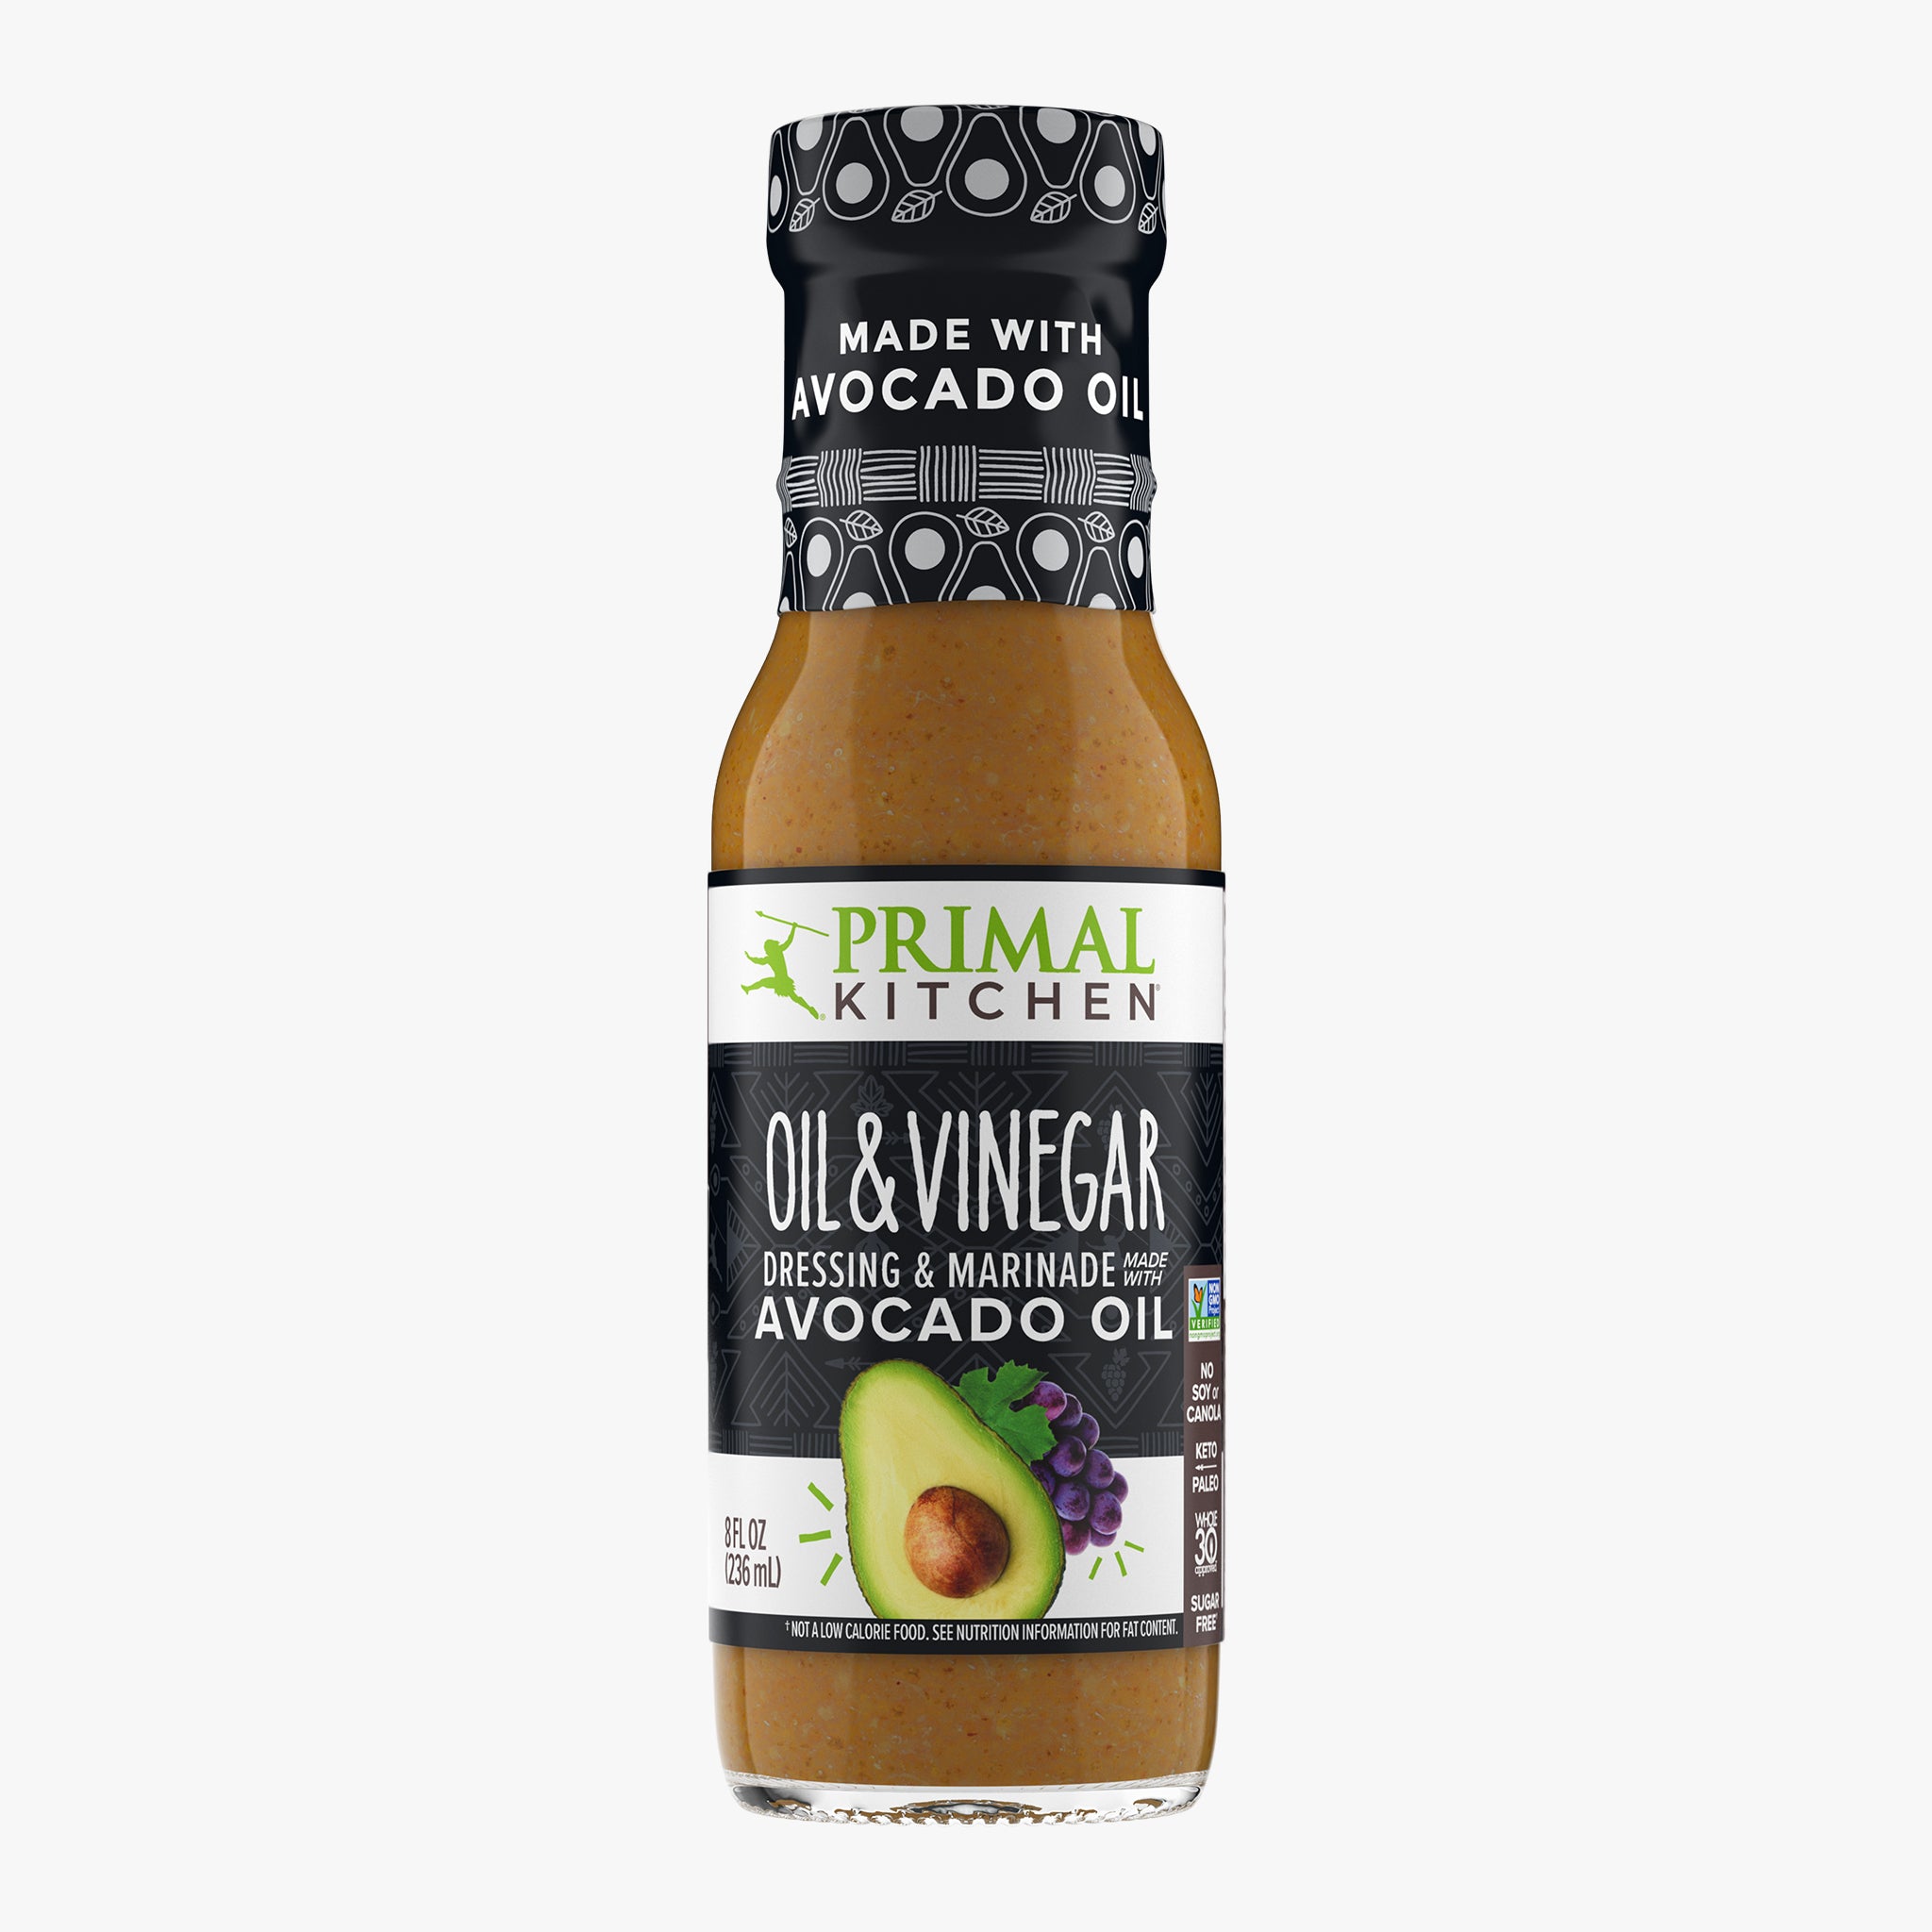 A bottle of Primal Kitchen Oil & Vinegar Dressing and Marinade made with avocado oil, with a black label, on a light grey background.